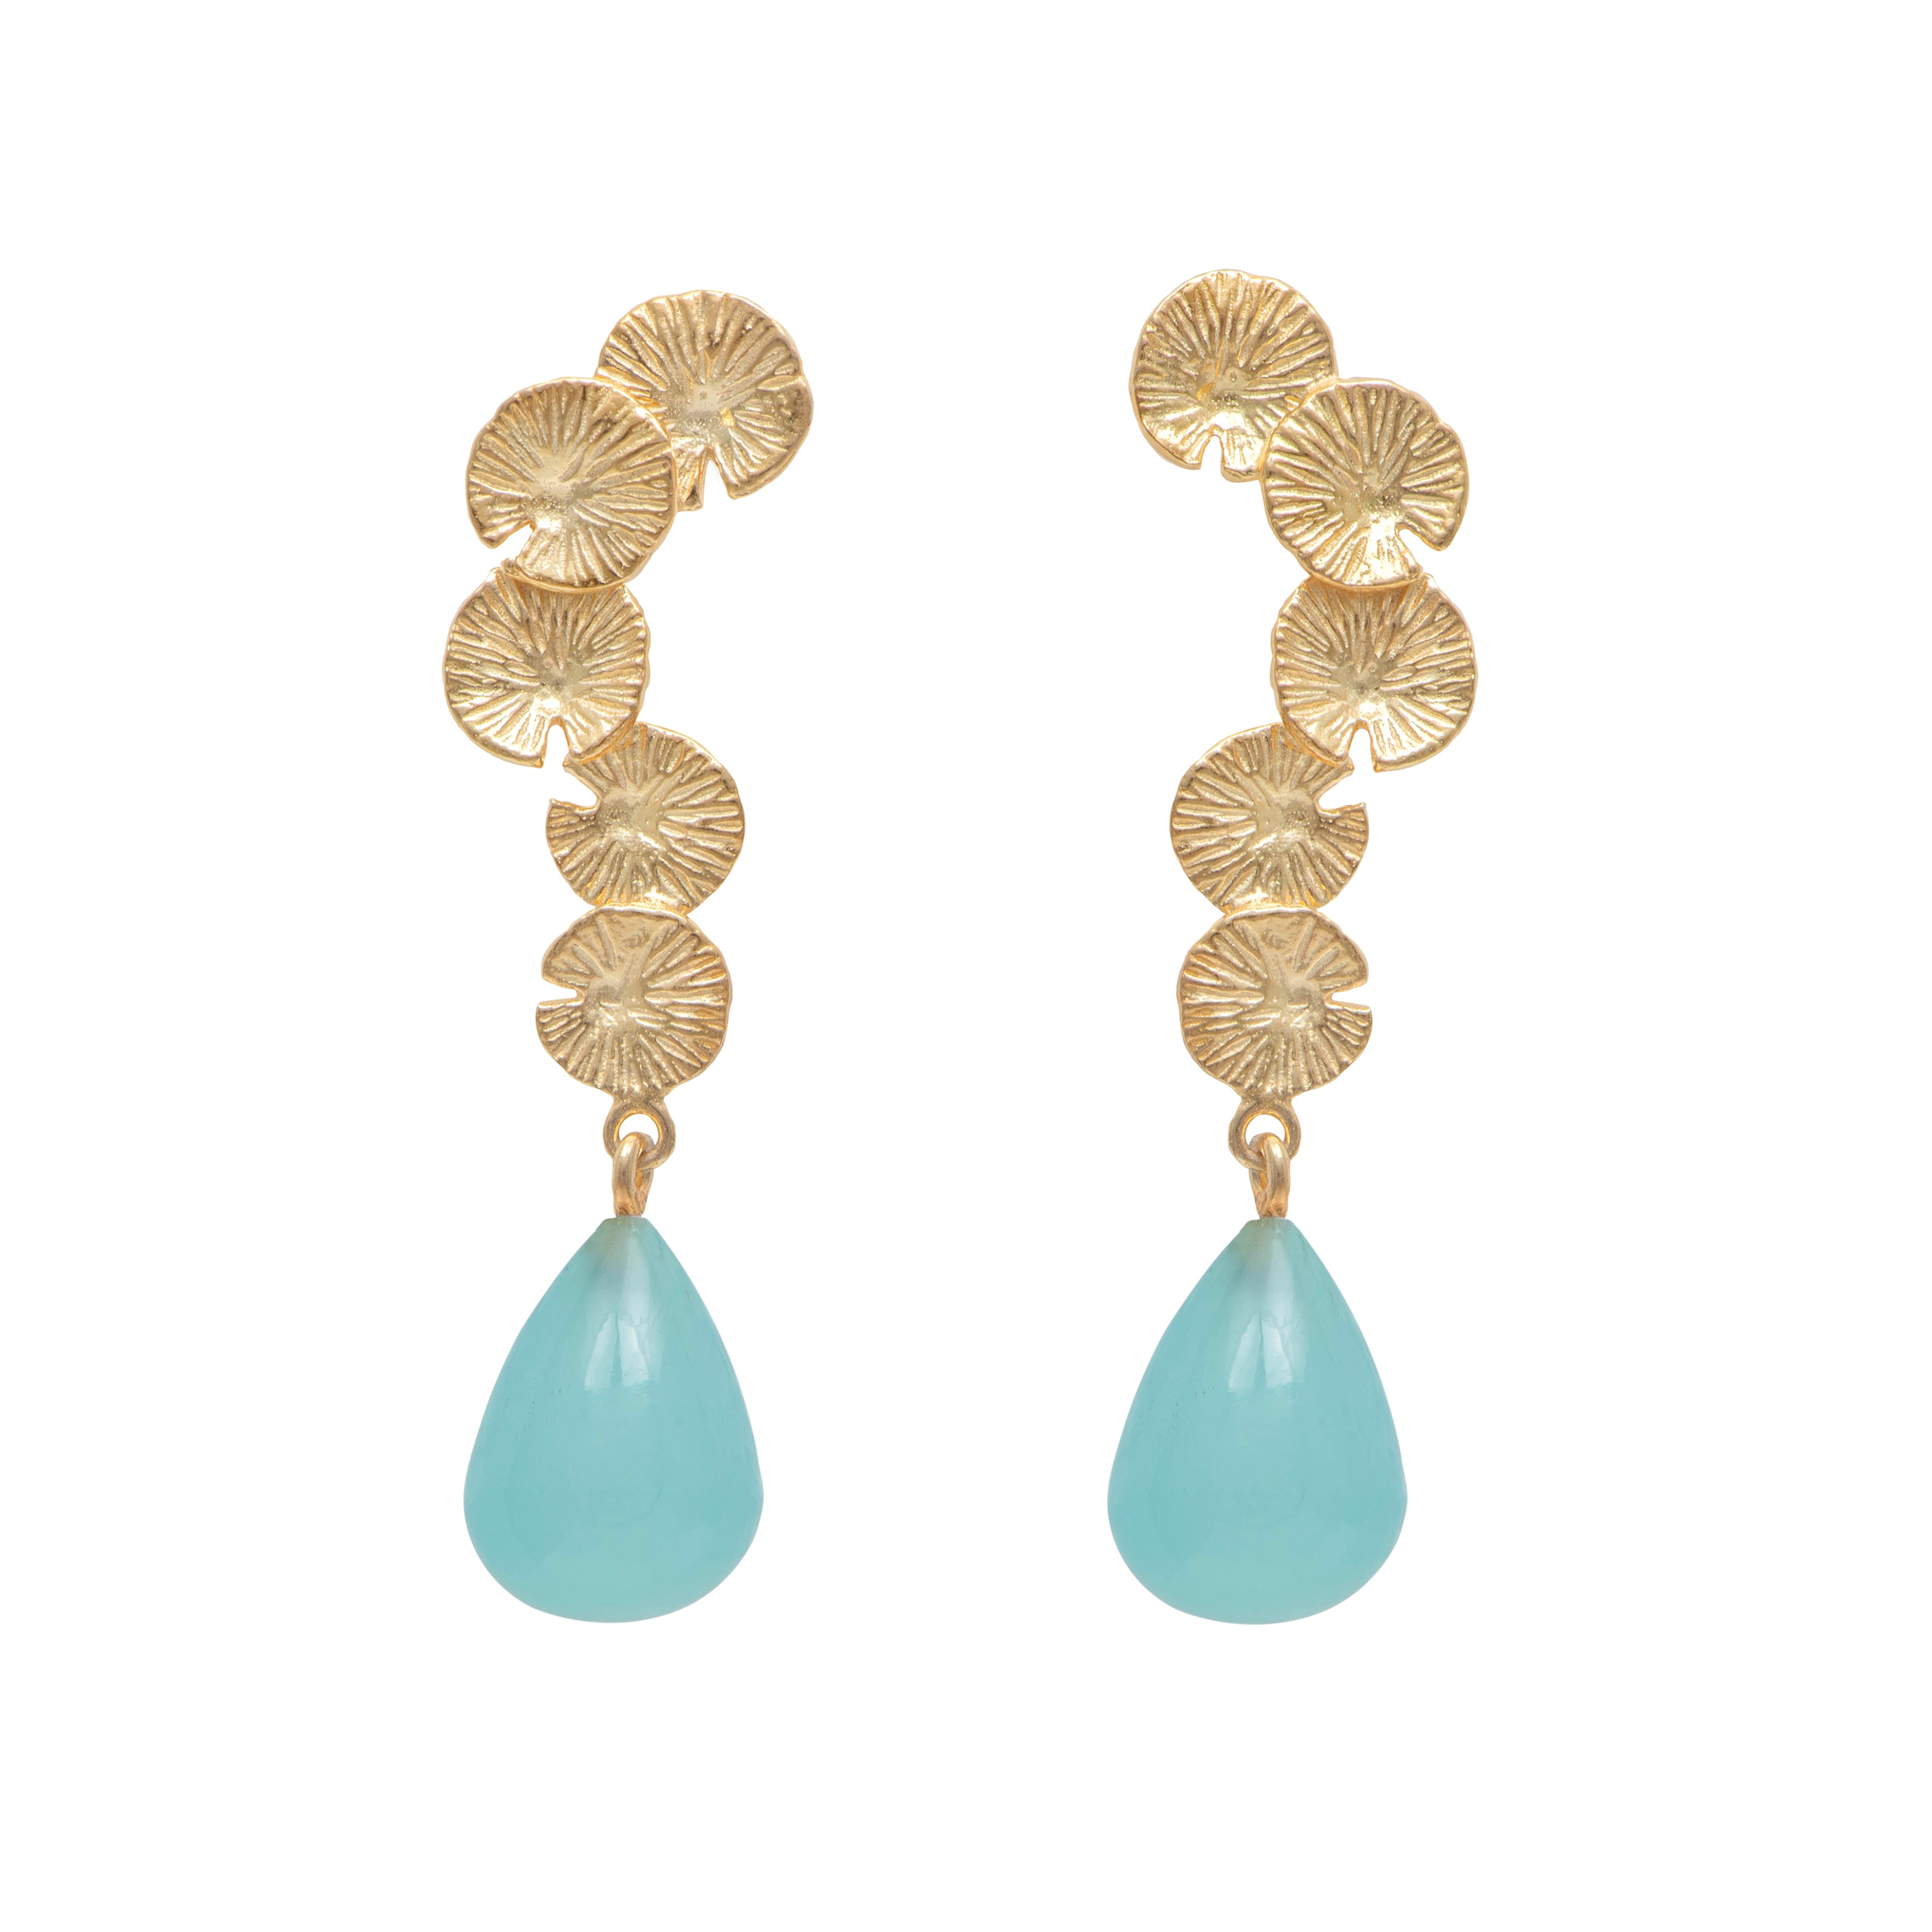 Lily Pad Earrings in Gold Plated Sterling Silver with an Aqua Chalcedony Stone Drop